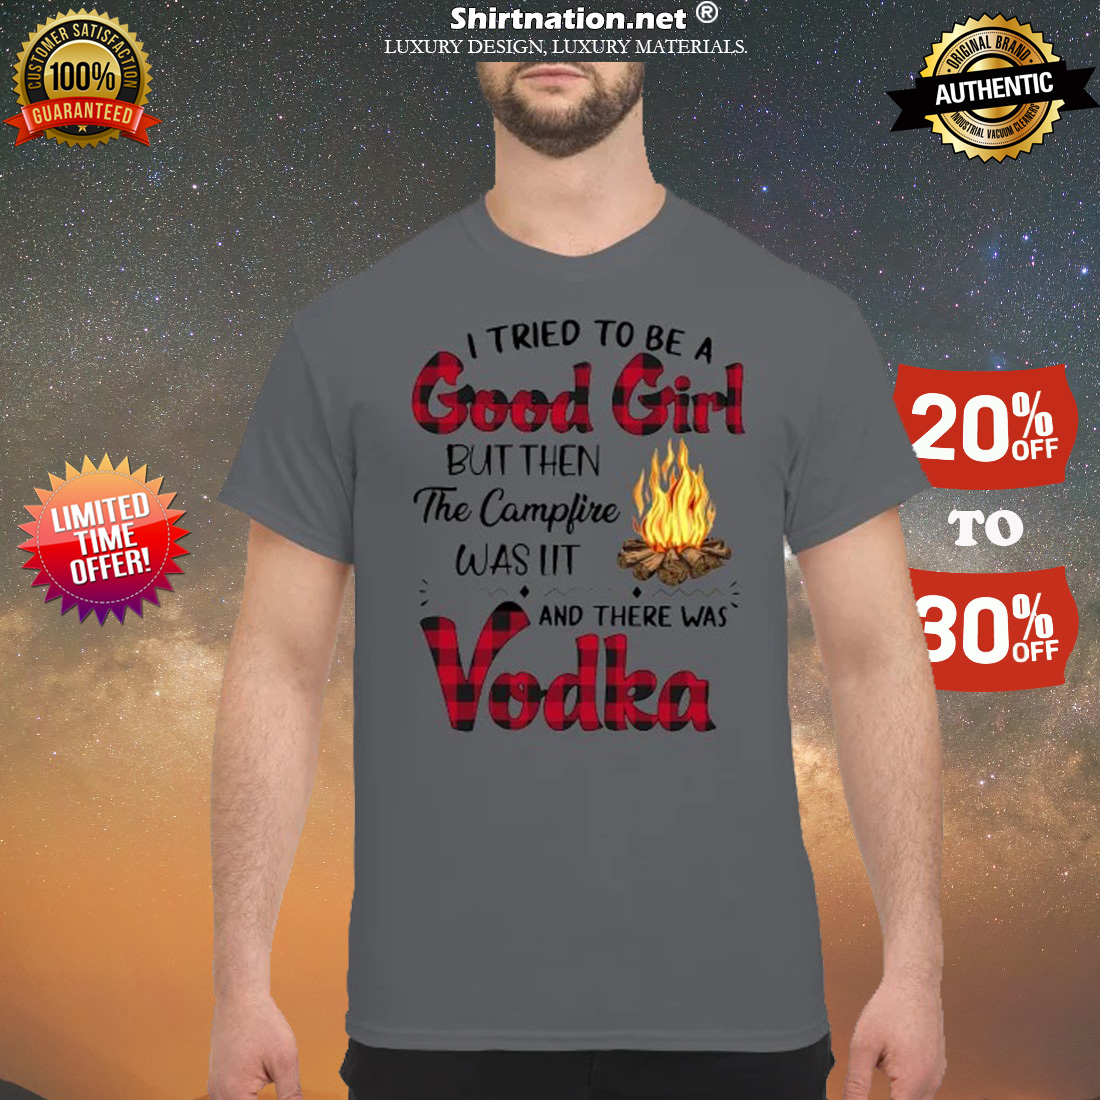 I tried to be a good girl but then the camfire was lit and there was Vodka classic shirt